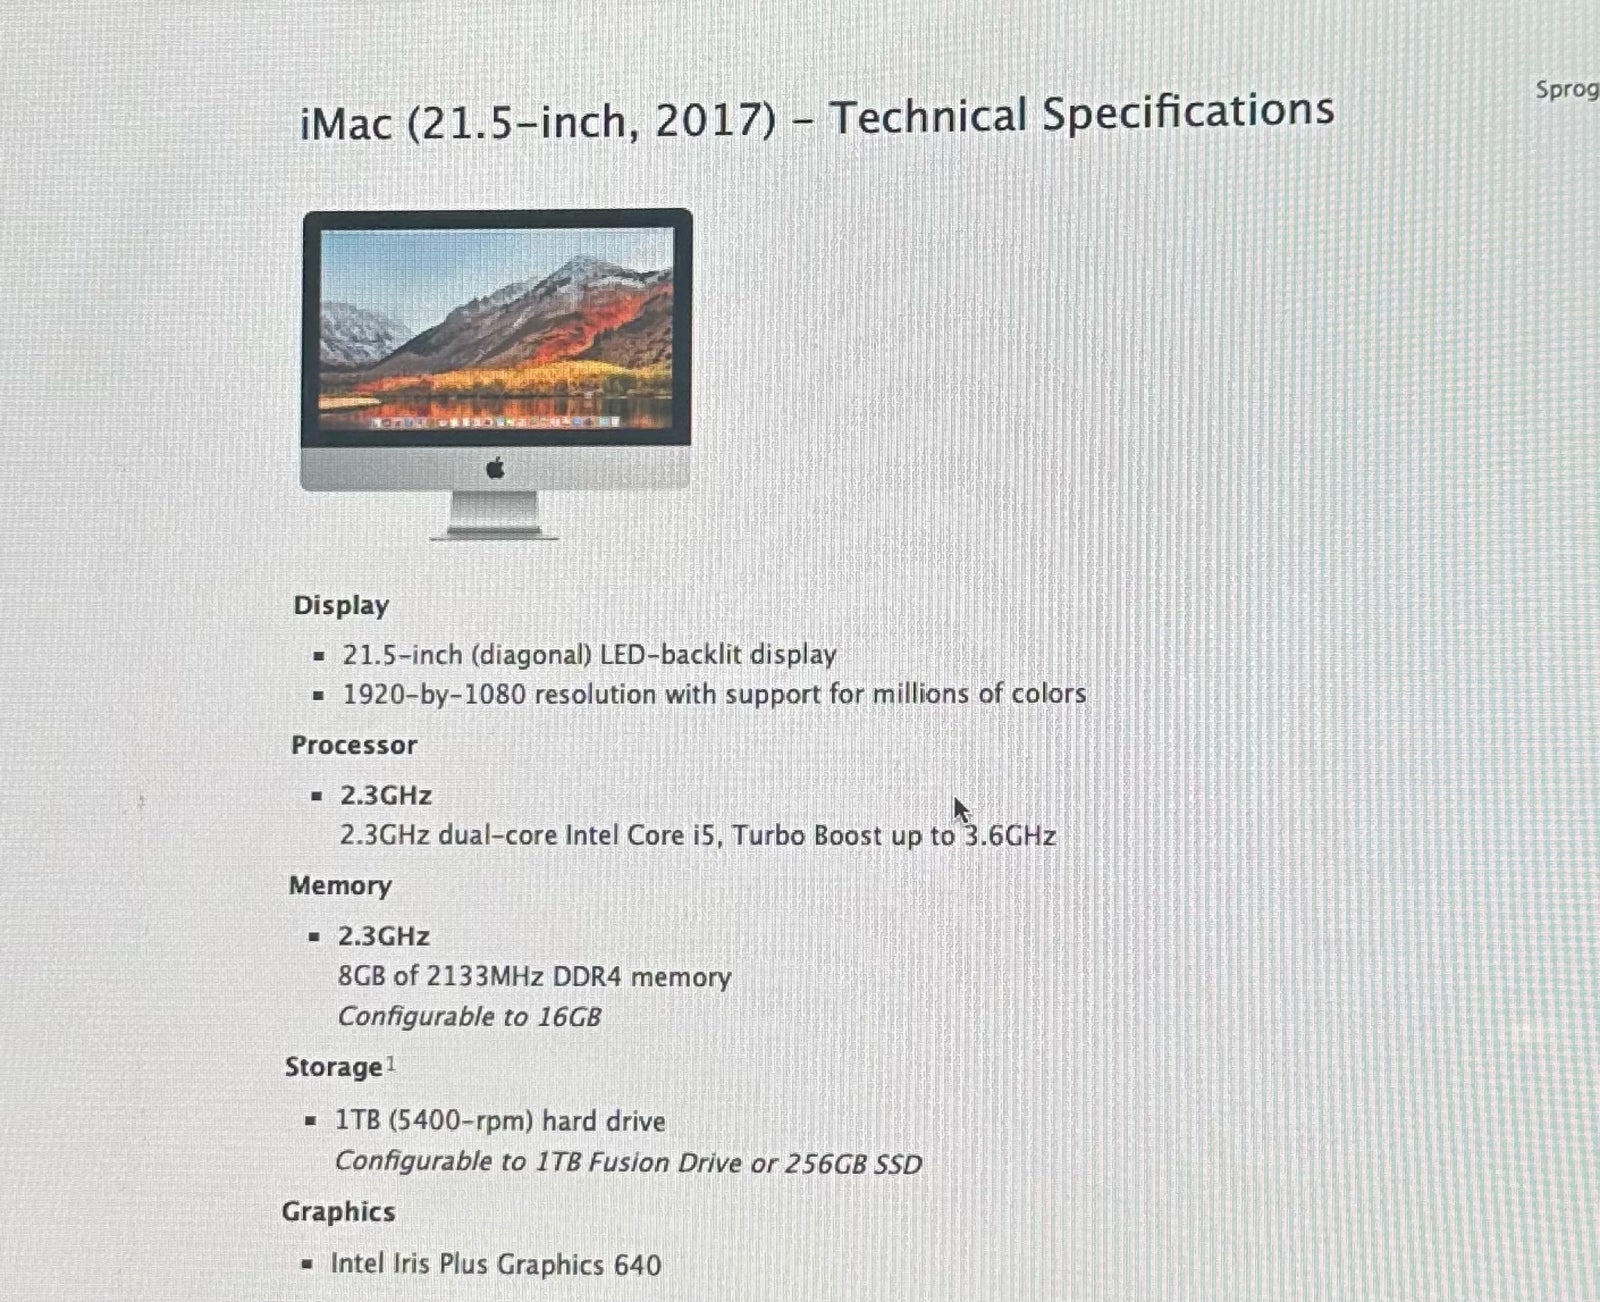 iMac (21.5-inch, 2017) - Technical Specifications